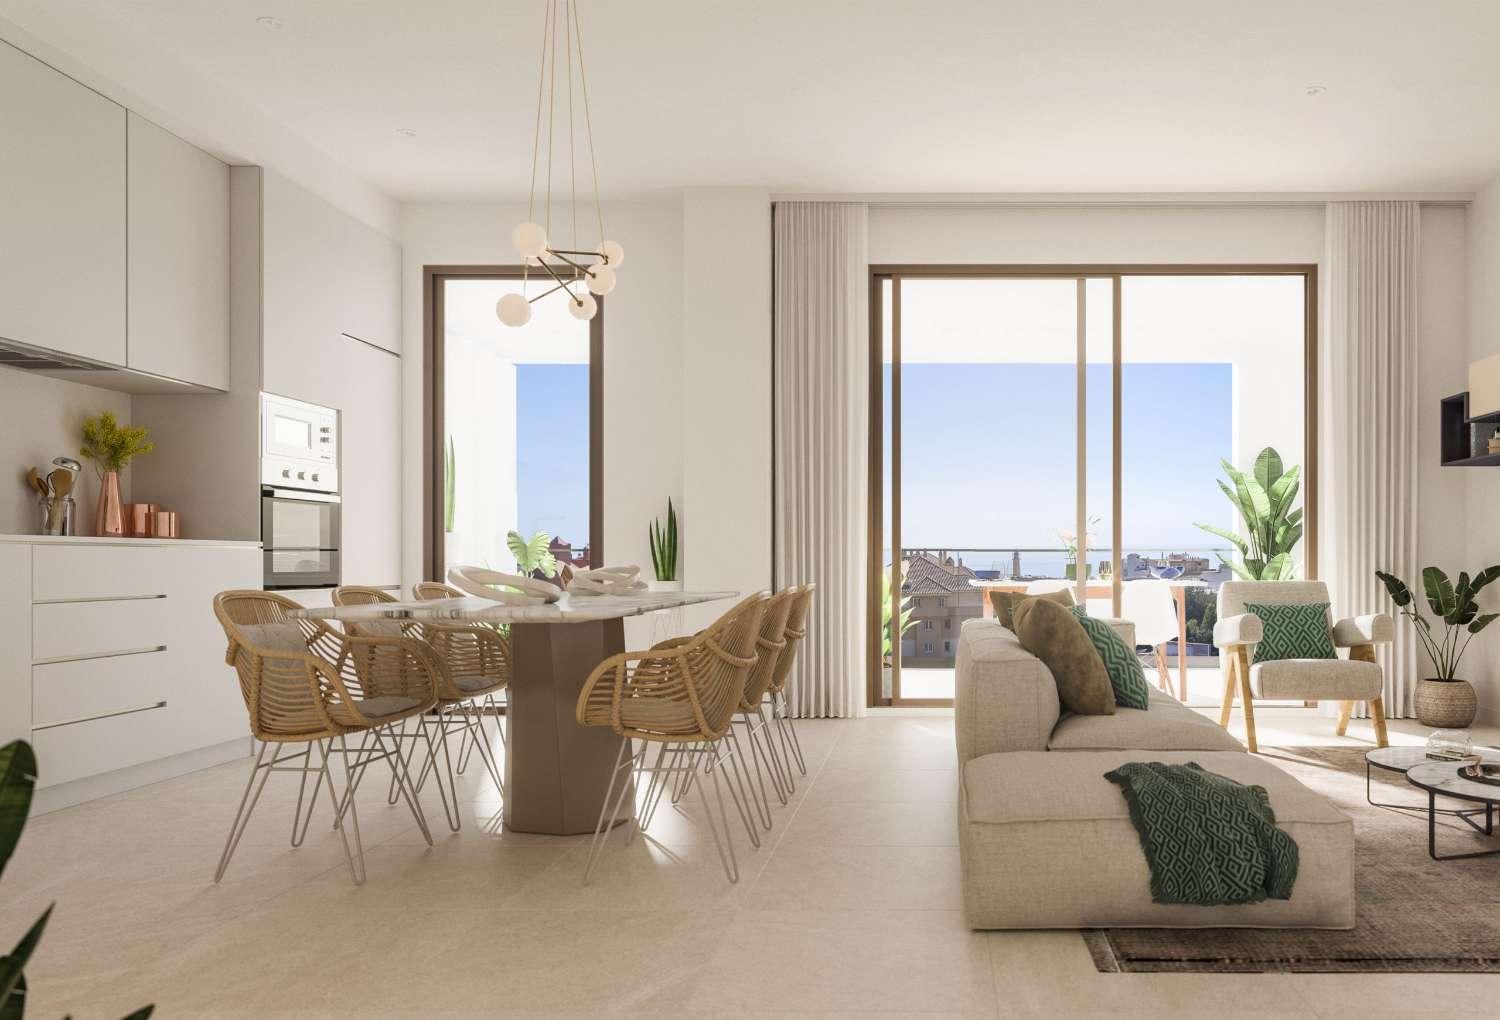 2 or 3 bedrooms, 2 bathrooms and a terrace overlooking the sea – from € 218.000